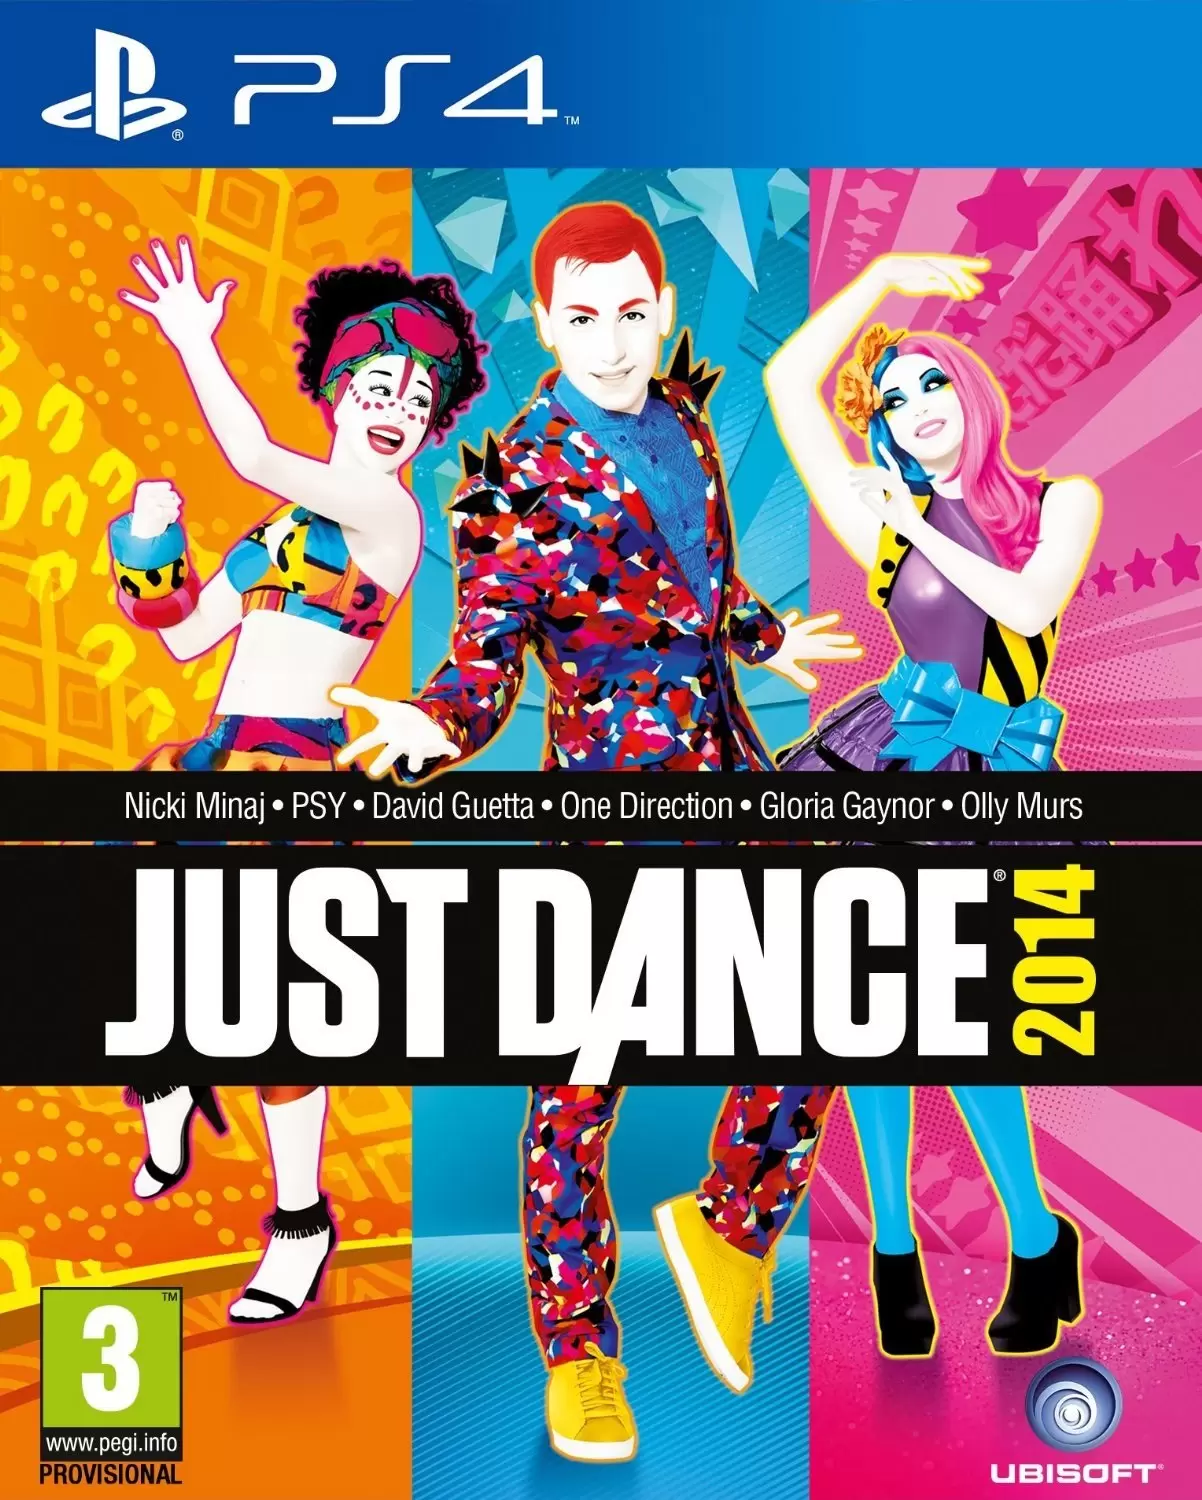 PS4 Games - Just Dance 2014